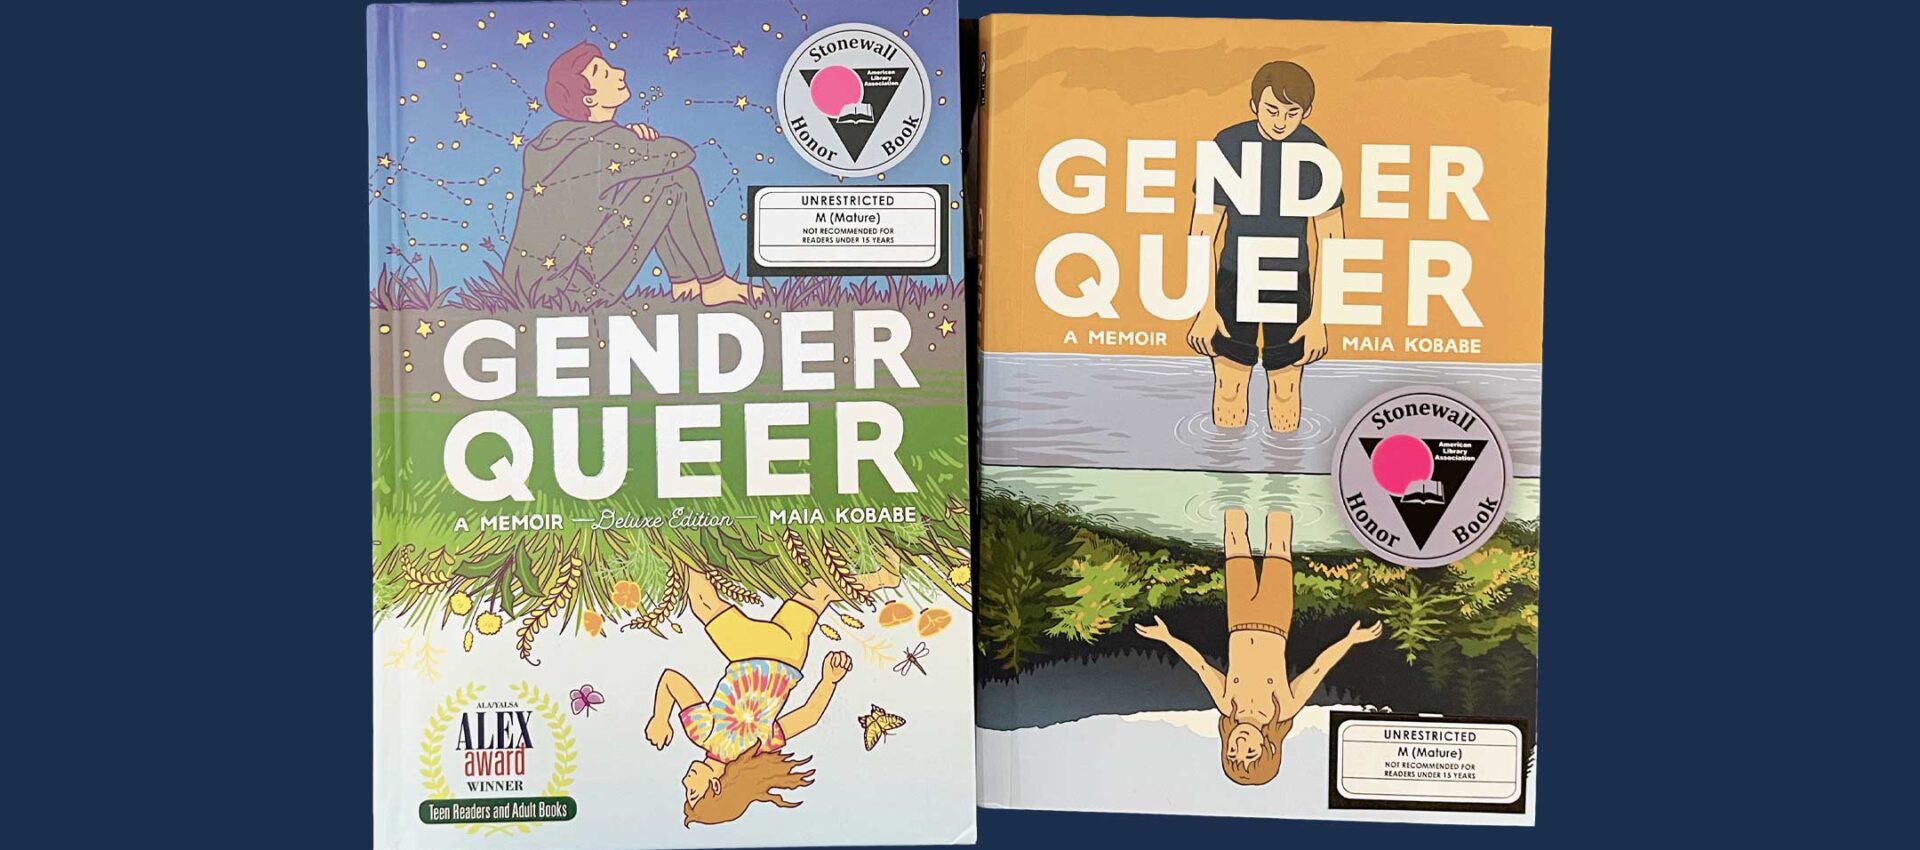 “Gender Queer” by Maia Kobabe